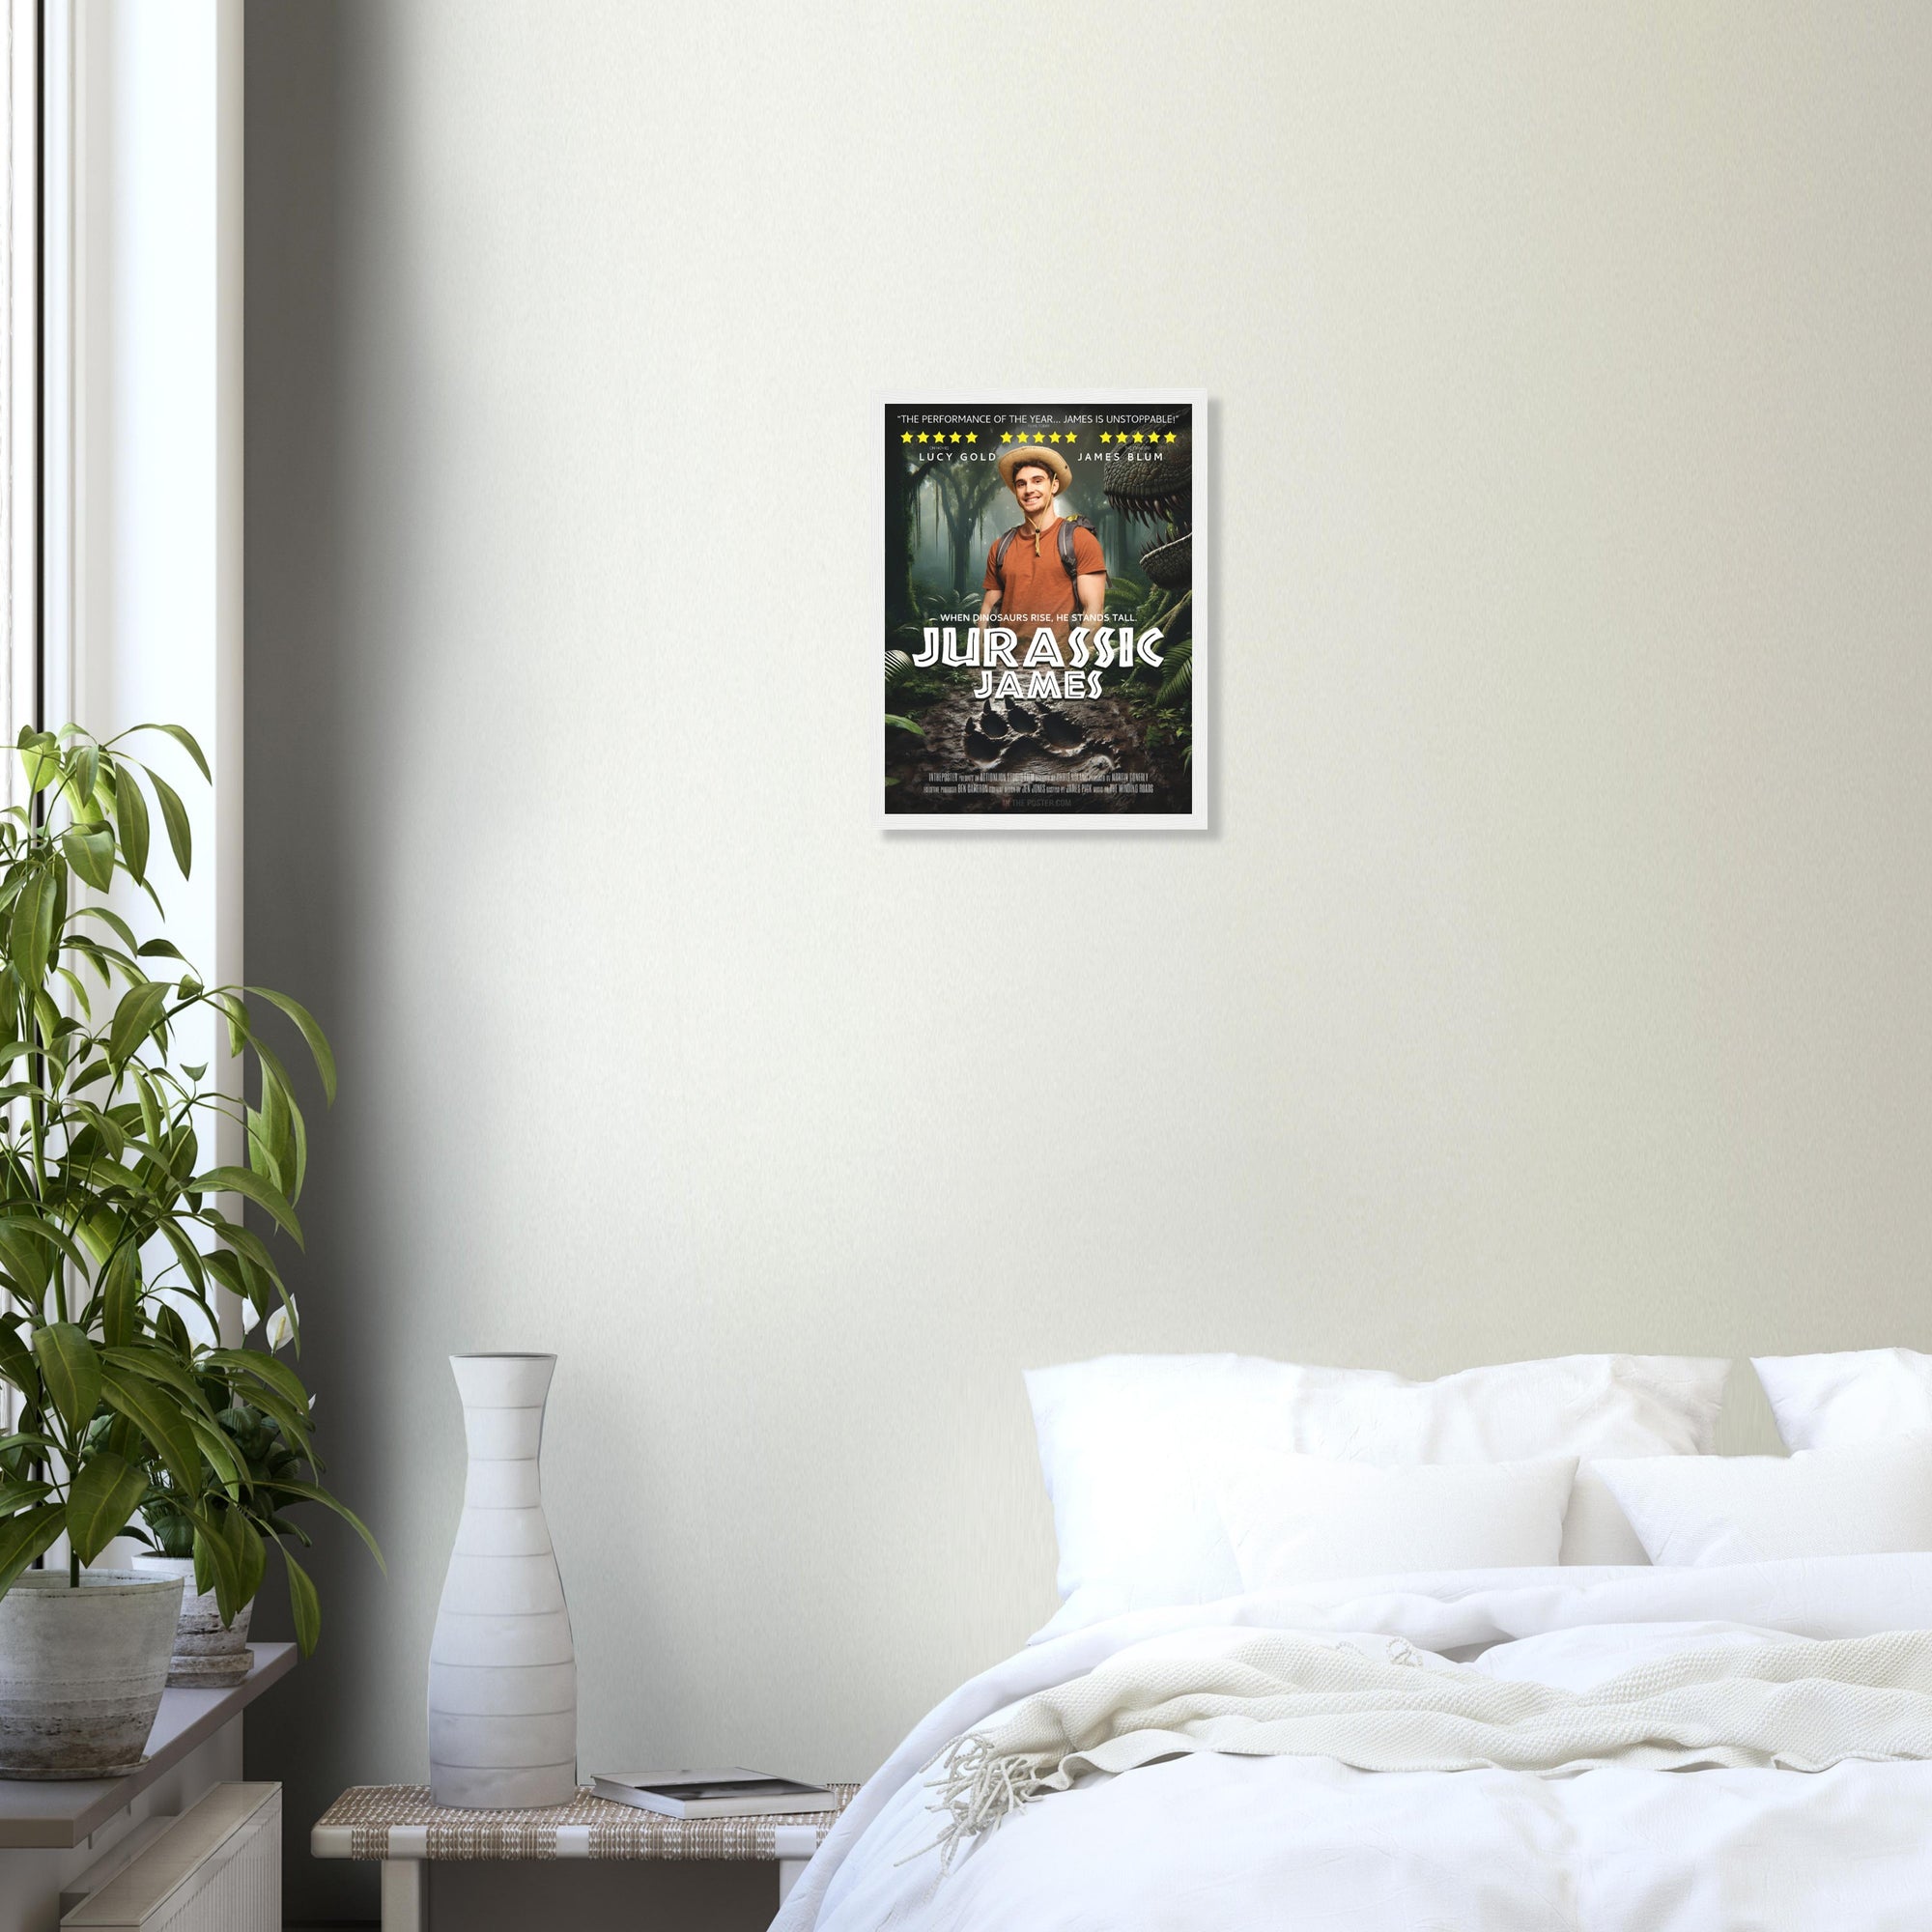 A small custom dinosaur-themed movie poster in a white frame is on a grey wall above a plant and a white bed.